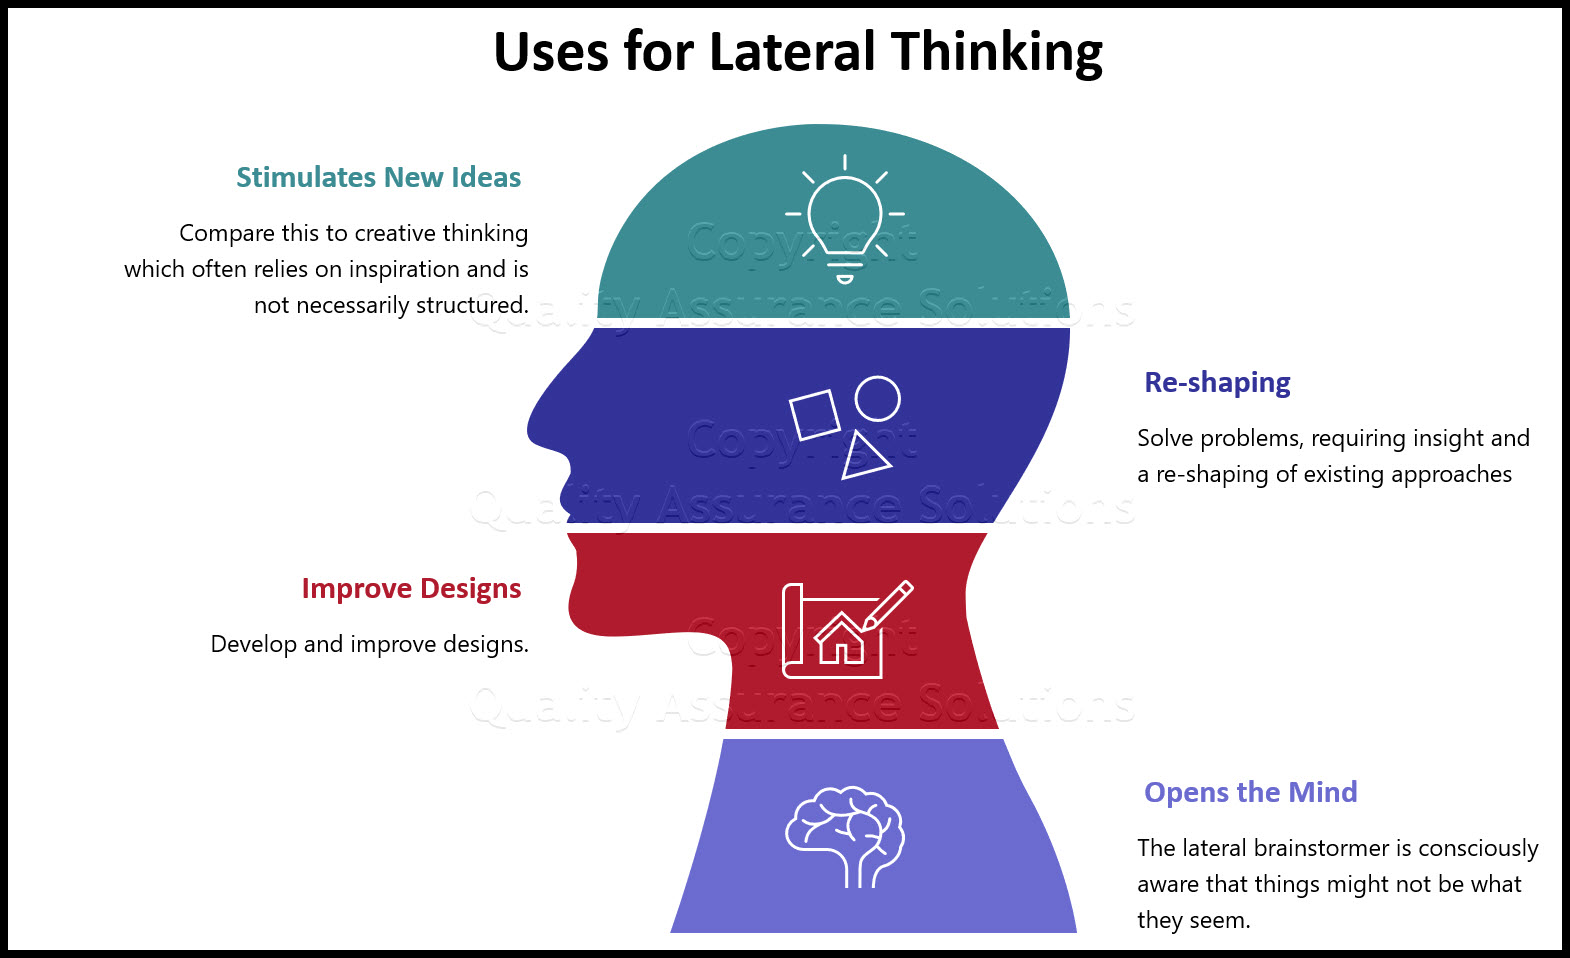 the process of reading laterally supports critical thinking by